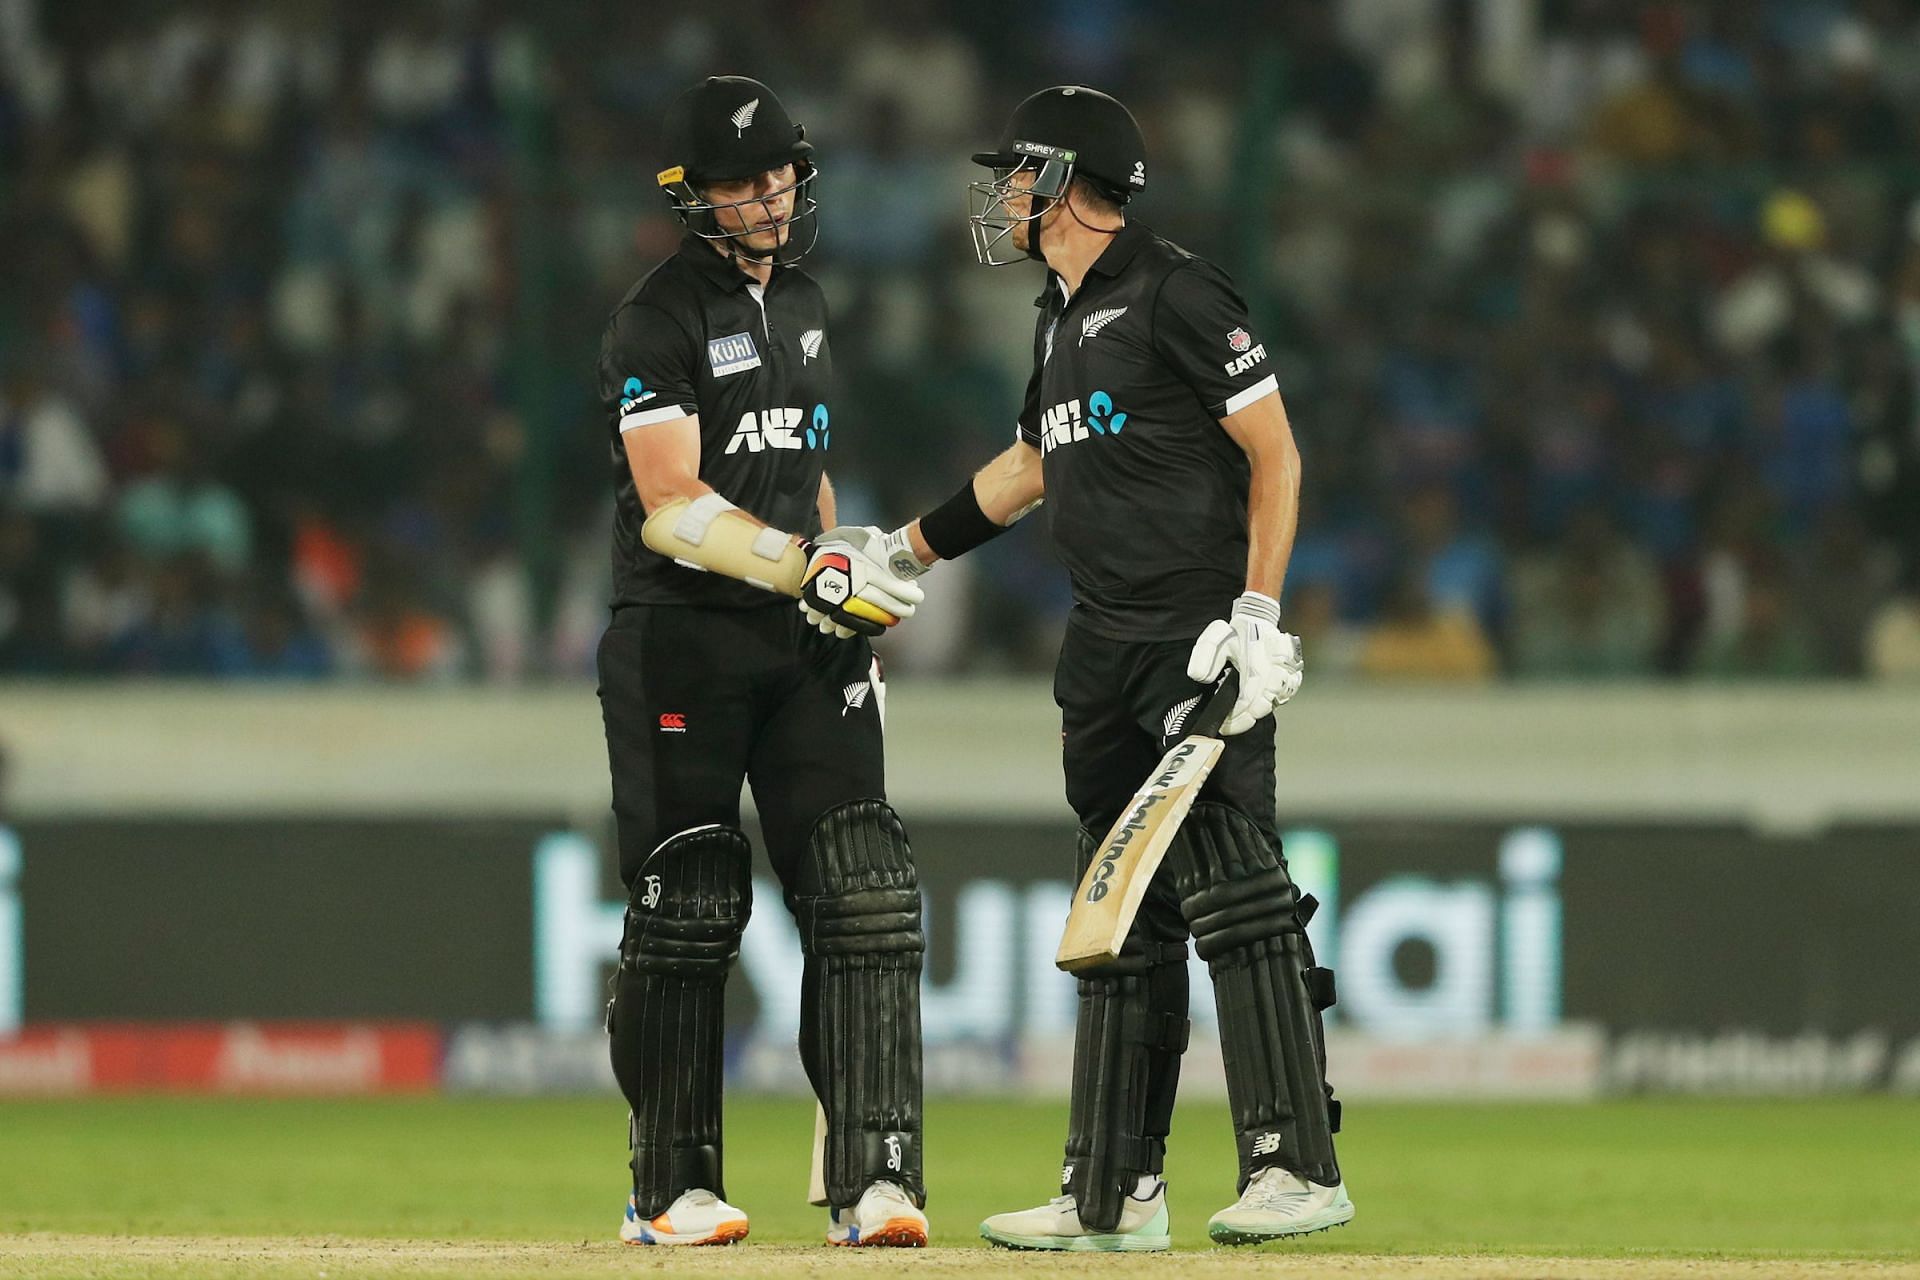 Michael Bracewell and Mitchell Santner almost pulled off a miracle for New Zealand (Credits: Twitter)